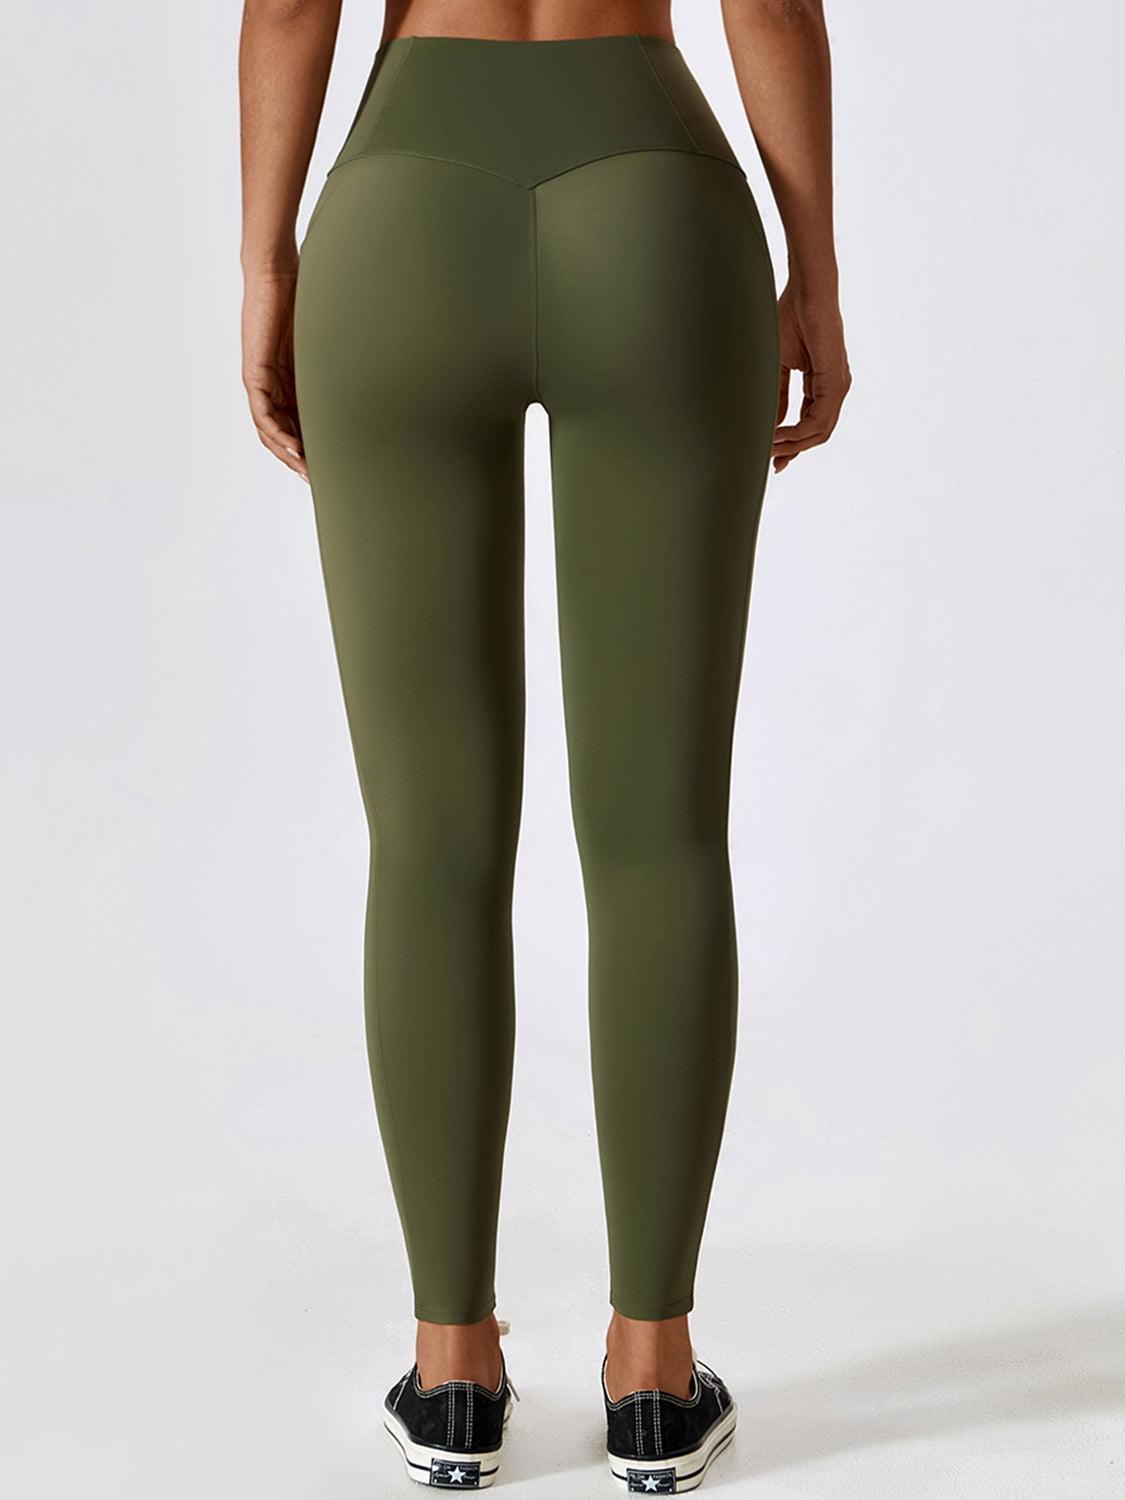 Active And Practical Slim Fit Leggings With Pockets - MXSTUDIO.COM